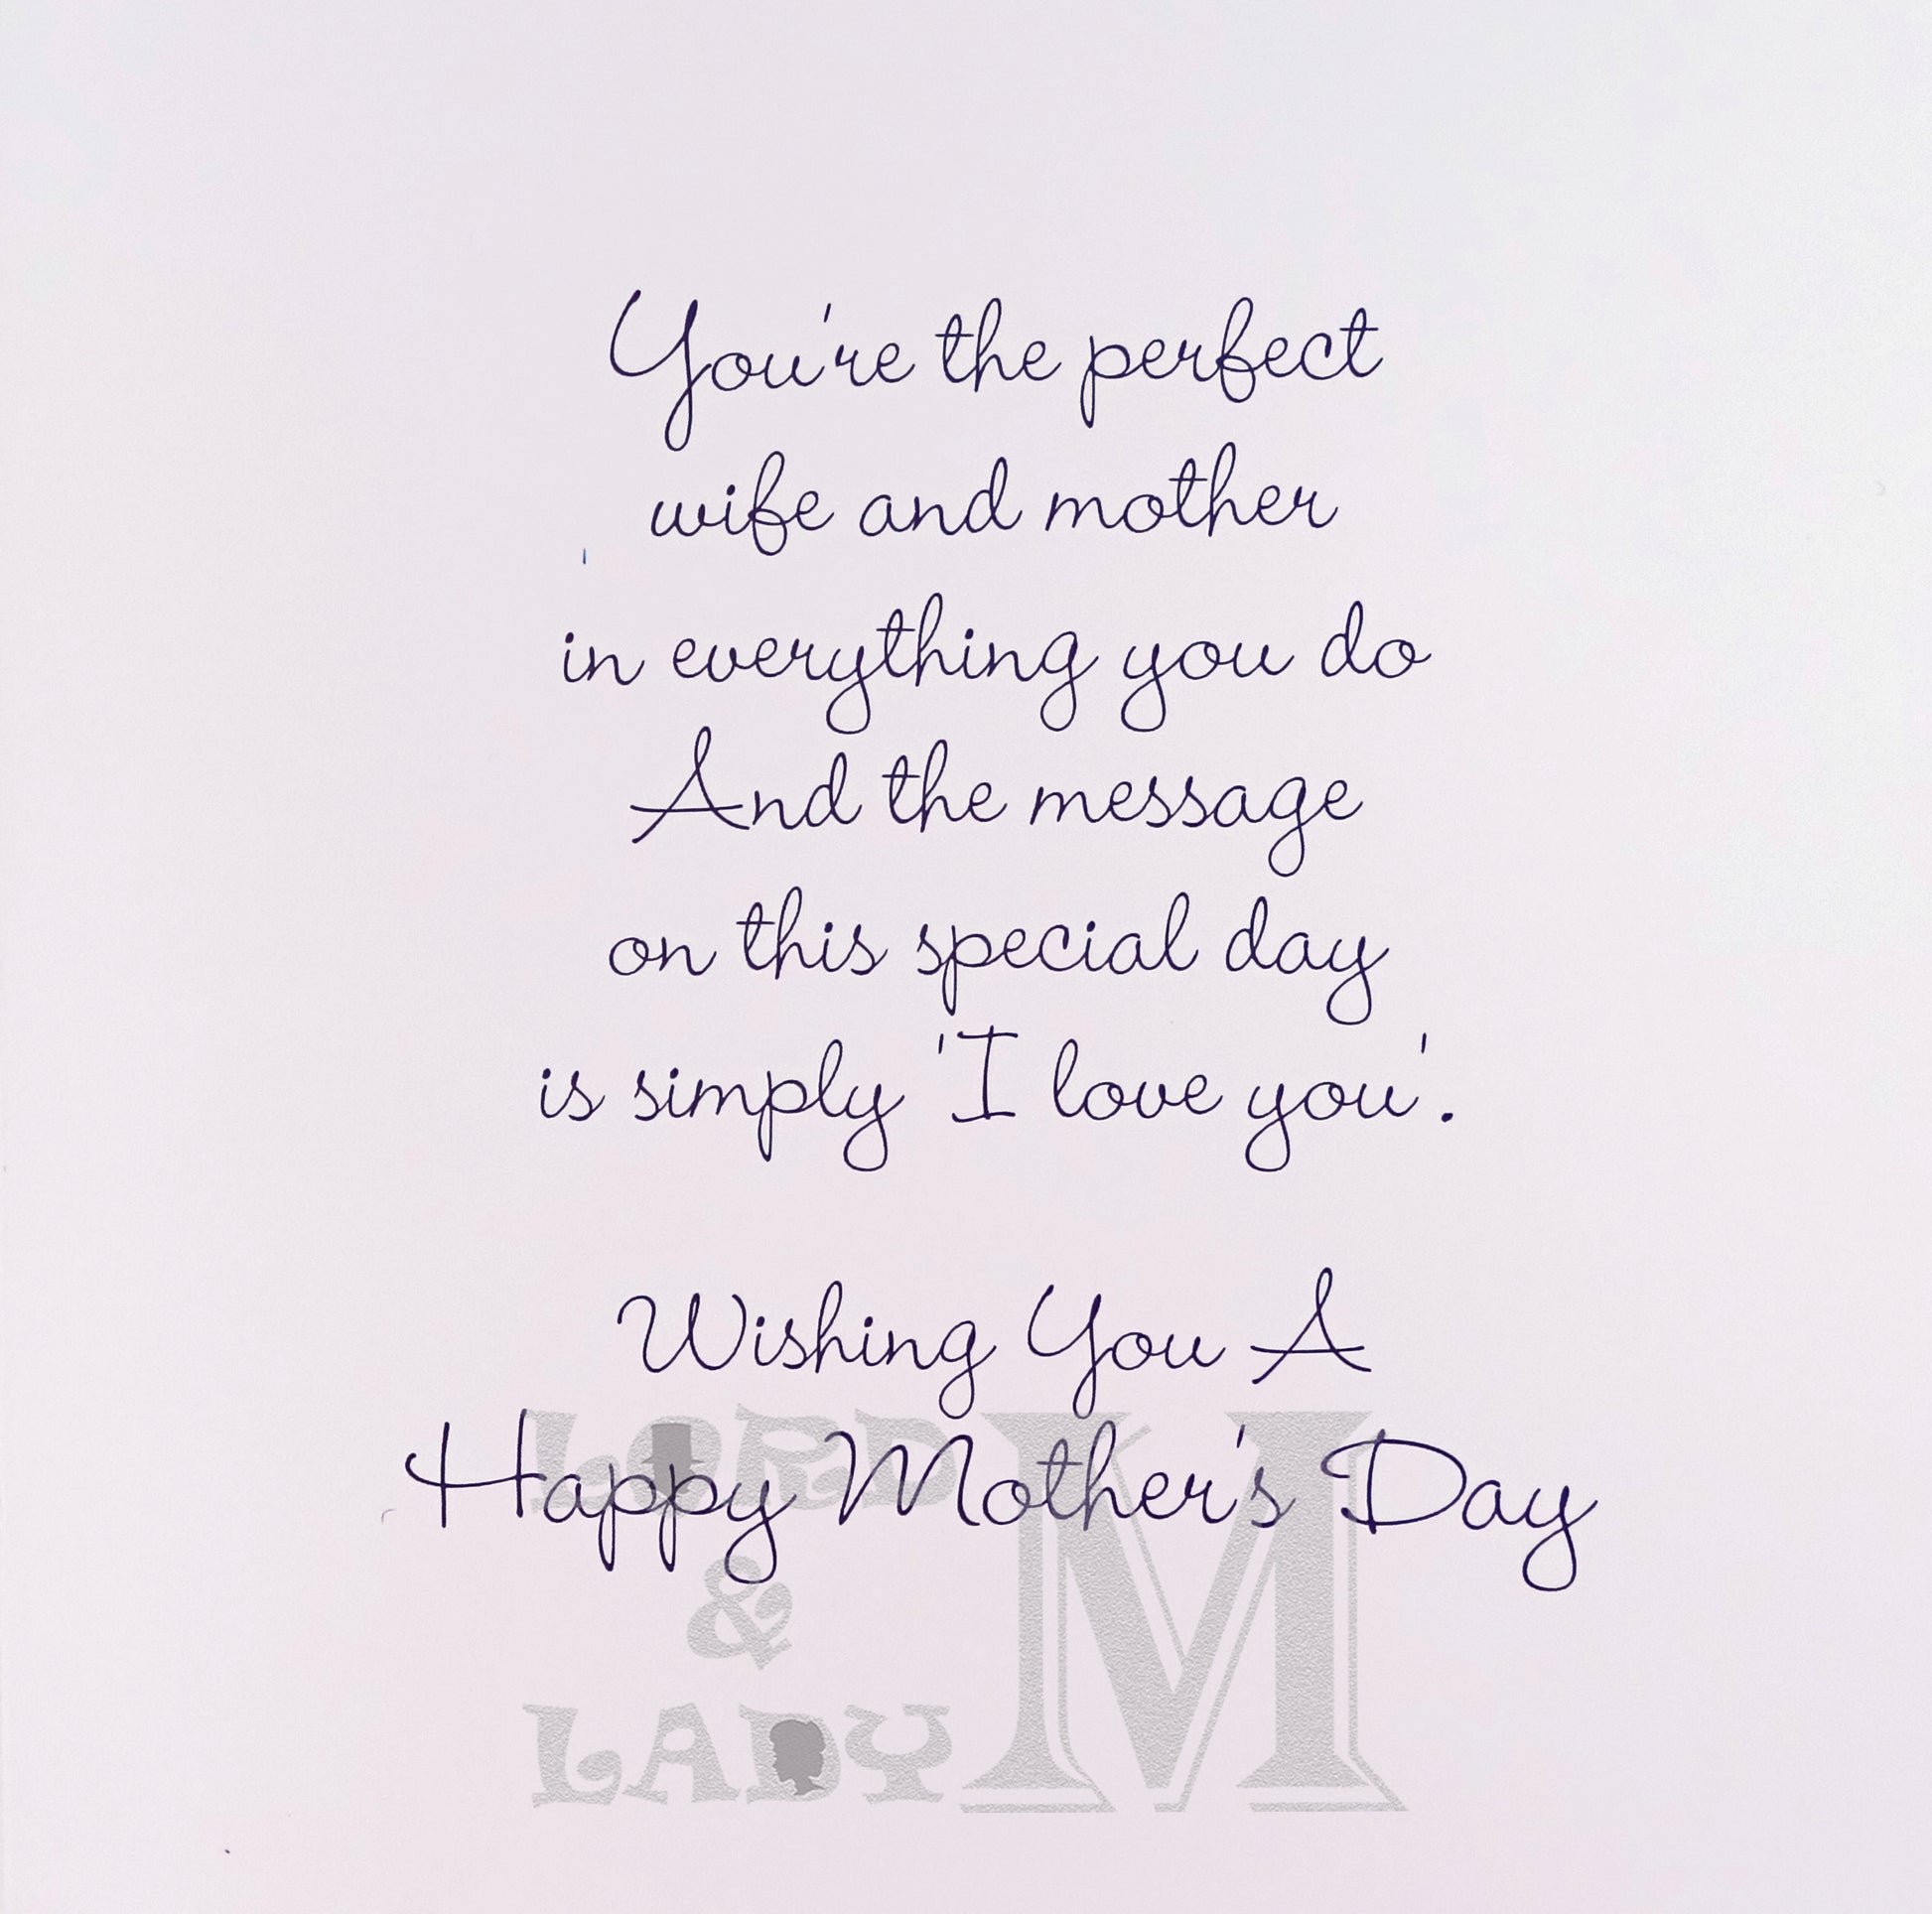 23cm - Mother's Day Wishes For My Wife - E